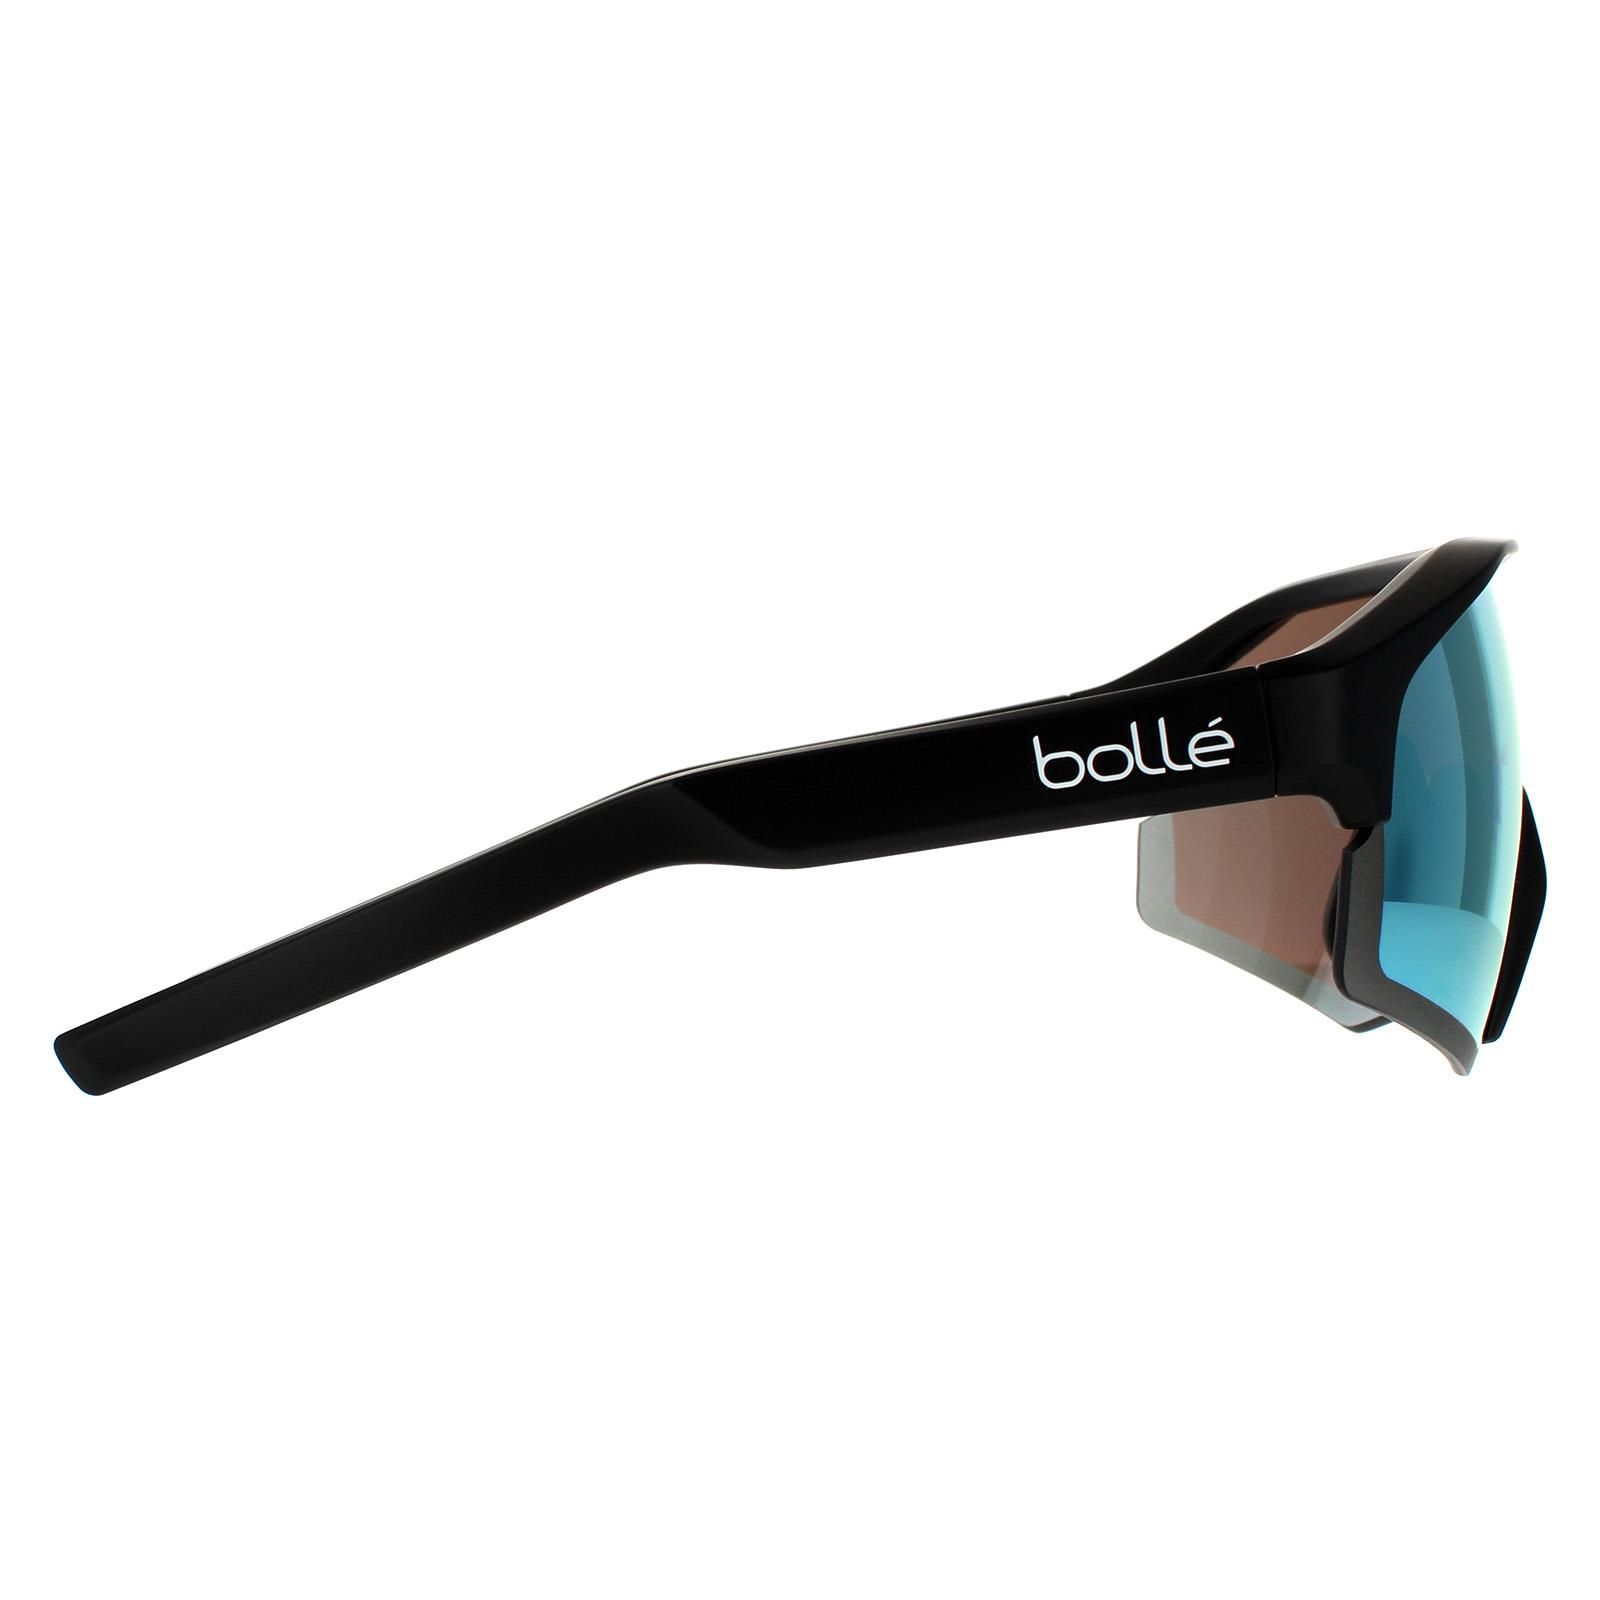 Bolle Wrap Mens Matte Black TNS Ice  Lightshifter feature curved temples on this very lightweight at 34g frame. This semi-rimless wrap around sports style is a small to medium fit and also has anti-fog, anti-scratch and Oleophobic treatment to the one piece interchangeable lenses. A very popular choice with cyclists including the AG2R Lan Mondiale pro cycling tea,